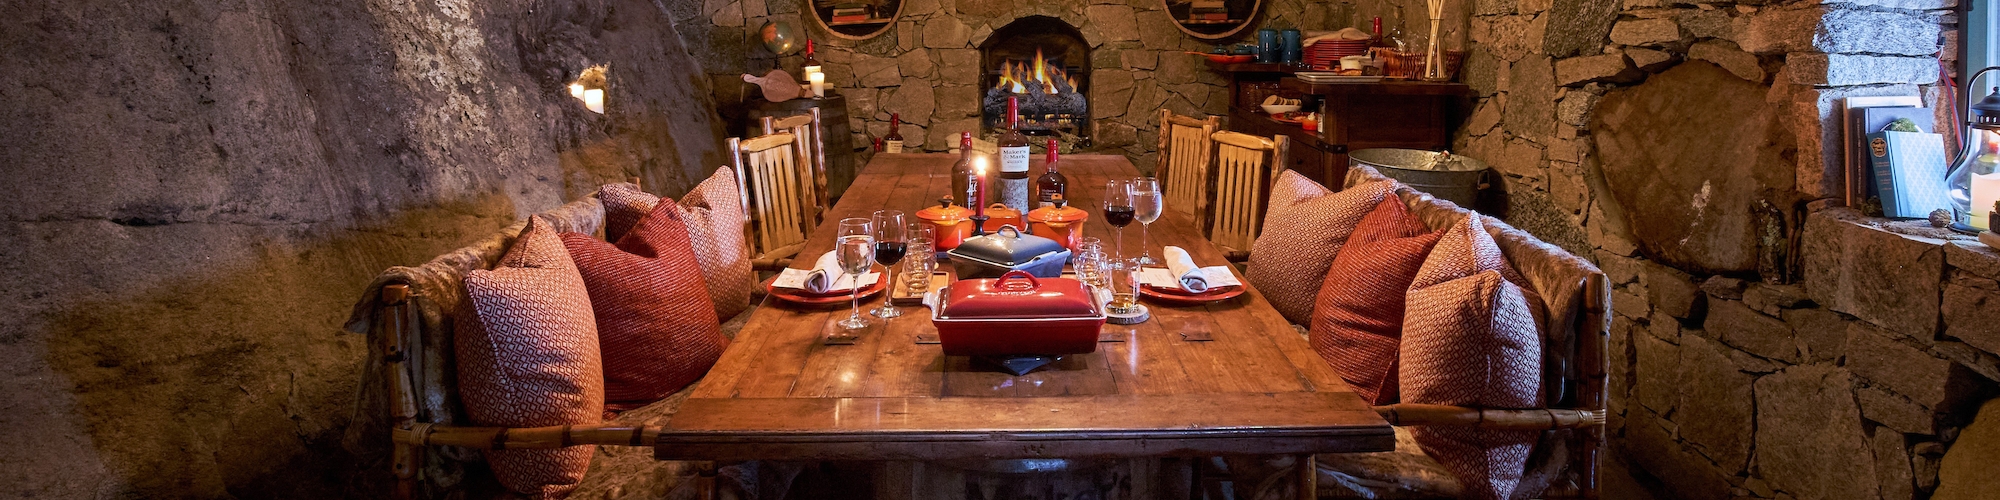 Rustic Hobbit House dining area at The Preserve Resort, RI, with a cozy fireplace and enchanting ambiance for intimate events.